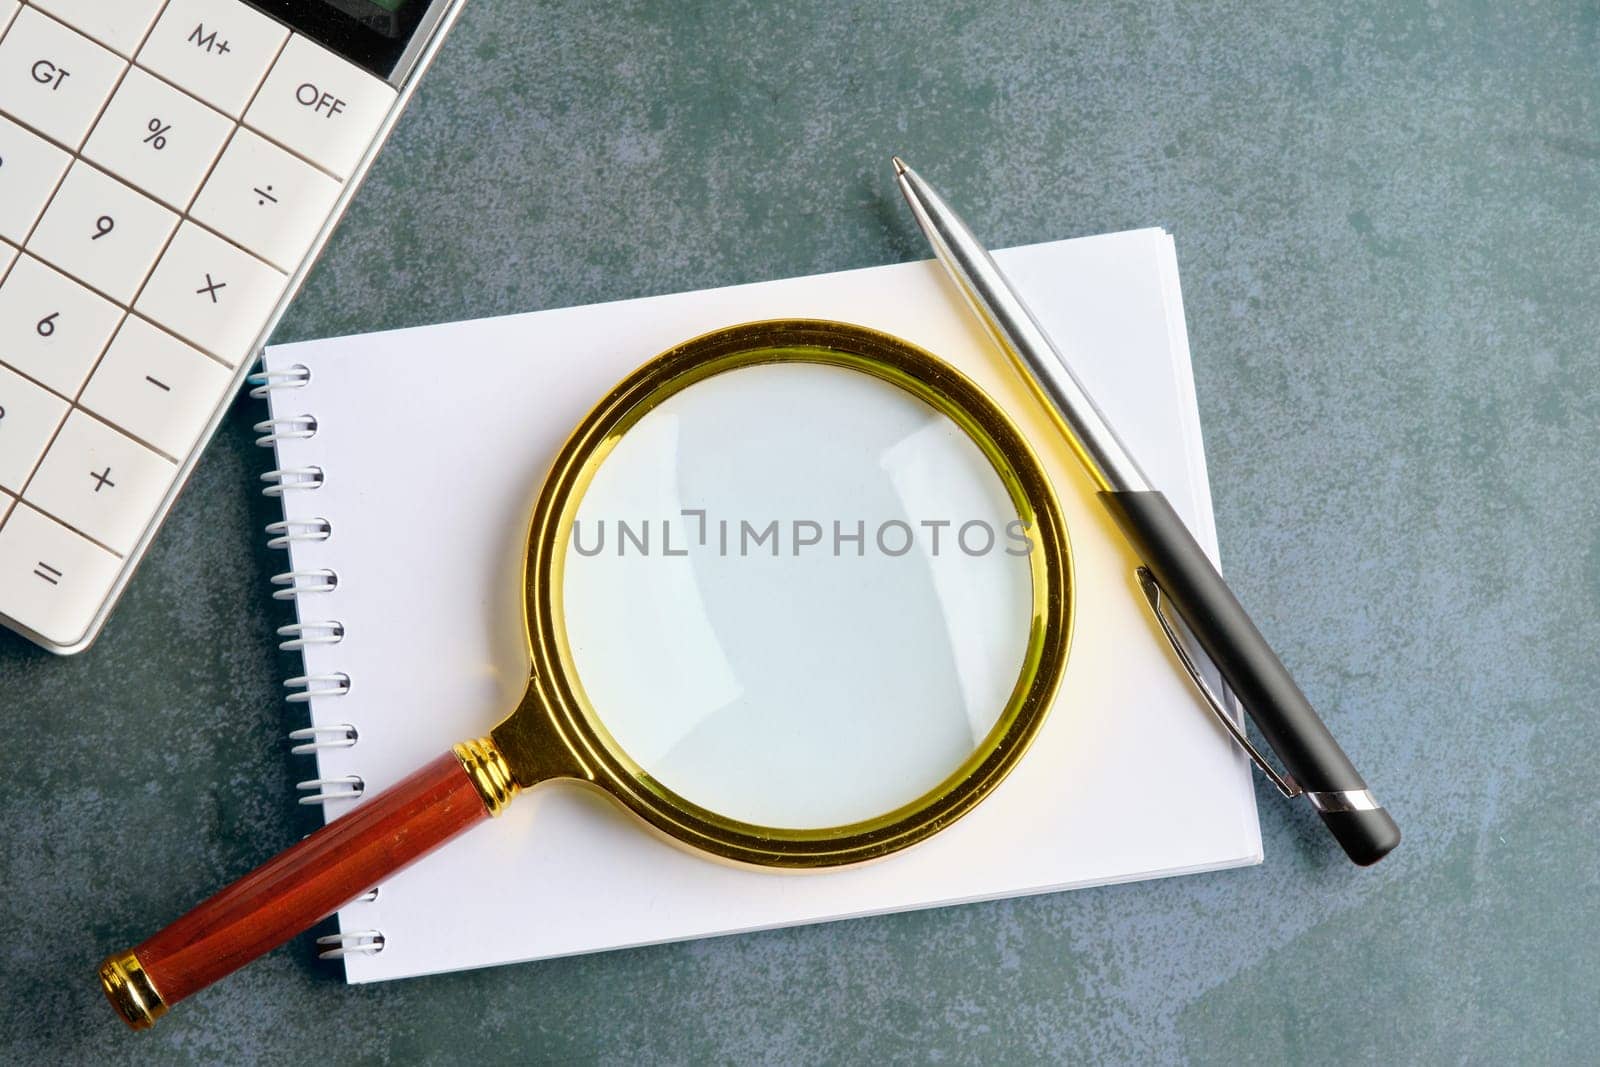 A magnifying glass on top of the notebook next to the calculator and pen. A place to copy